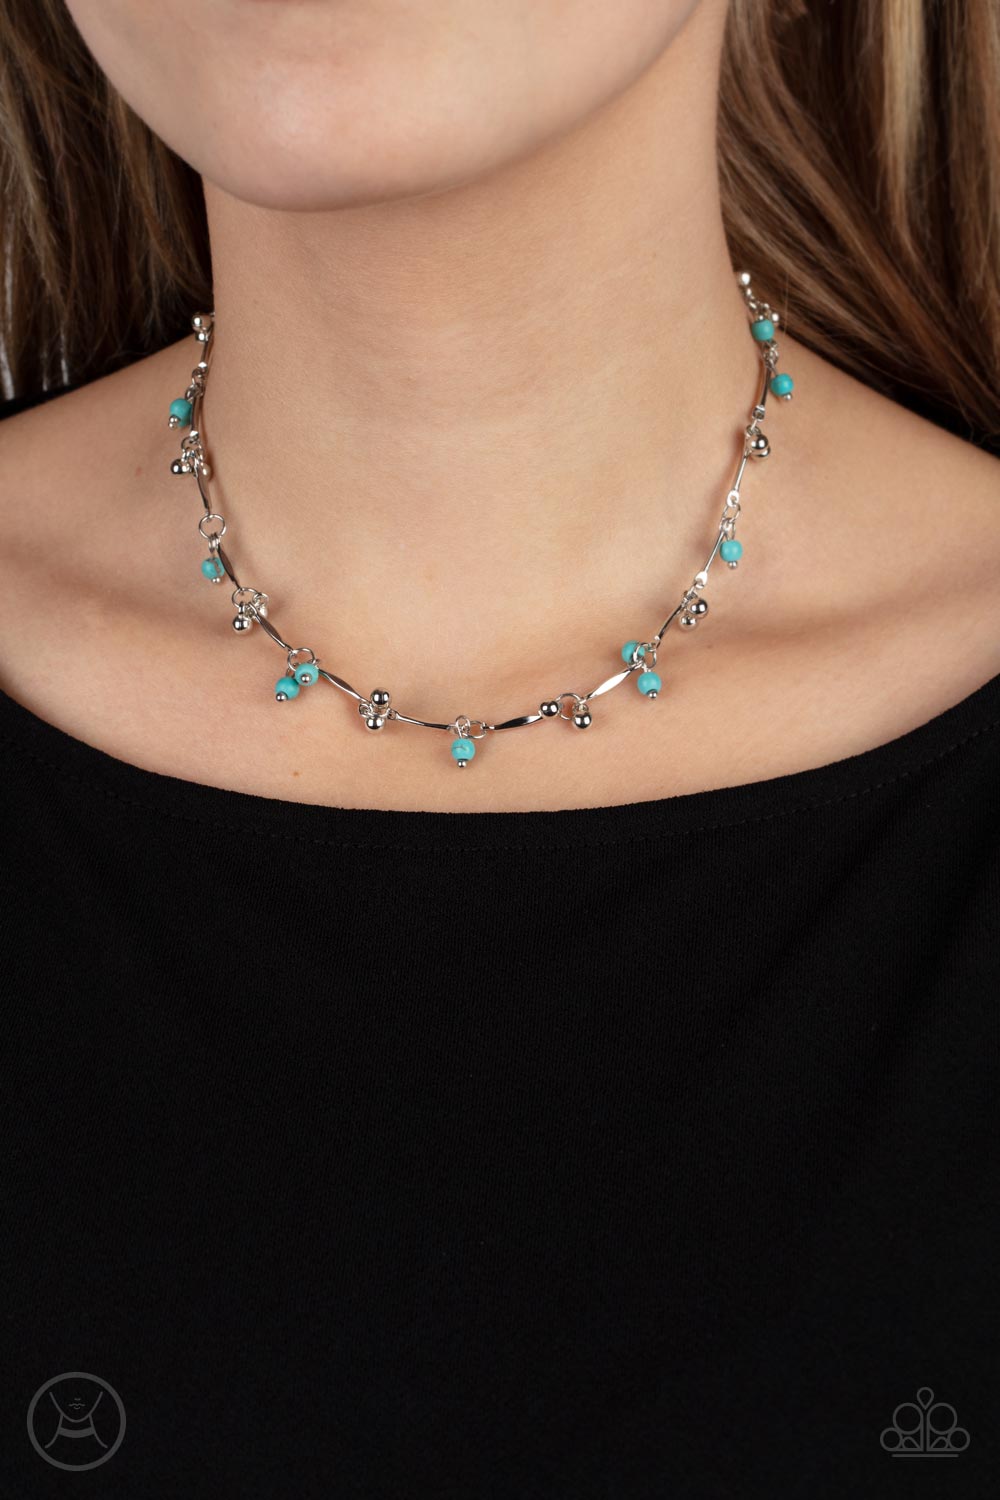 Sahara Social Blue Choker Necklace - Paparazzi Accessories- on model - CarasShop.com - $5 Jewelry by Cara Jewels